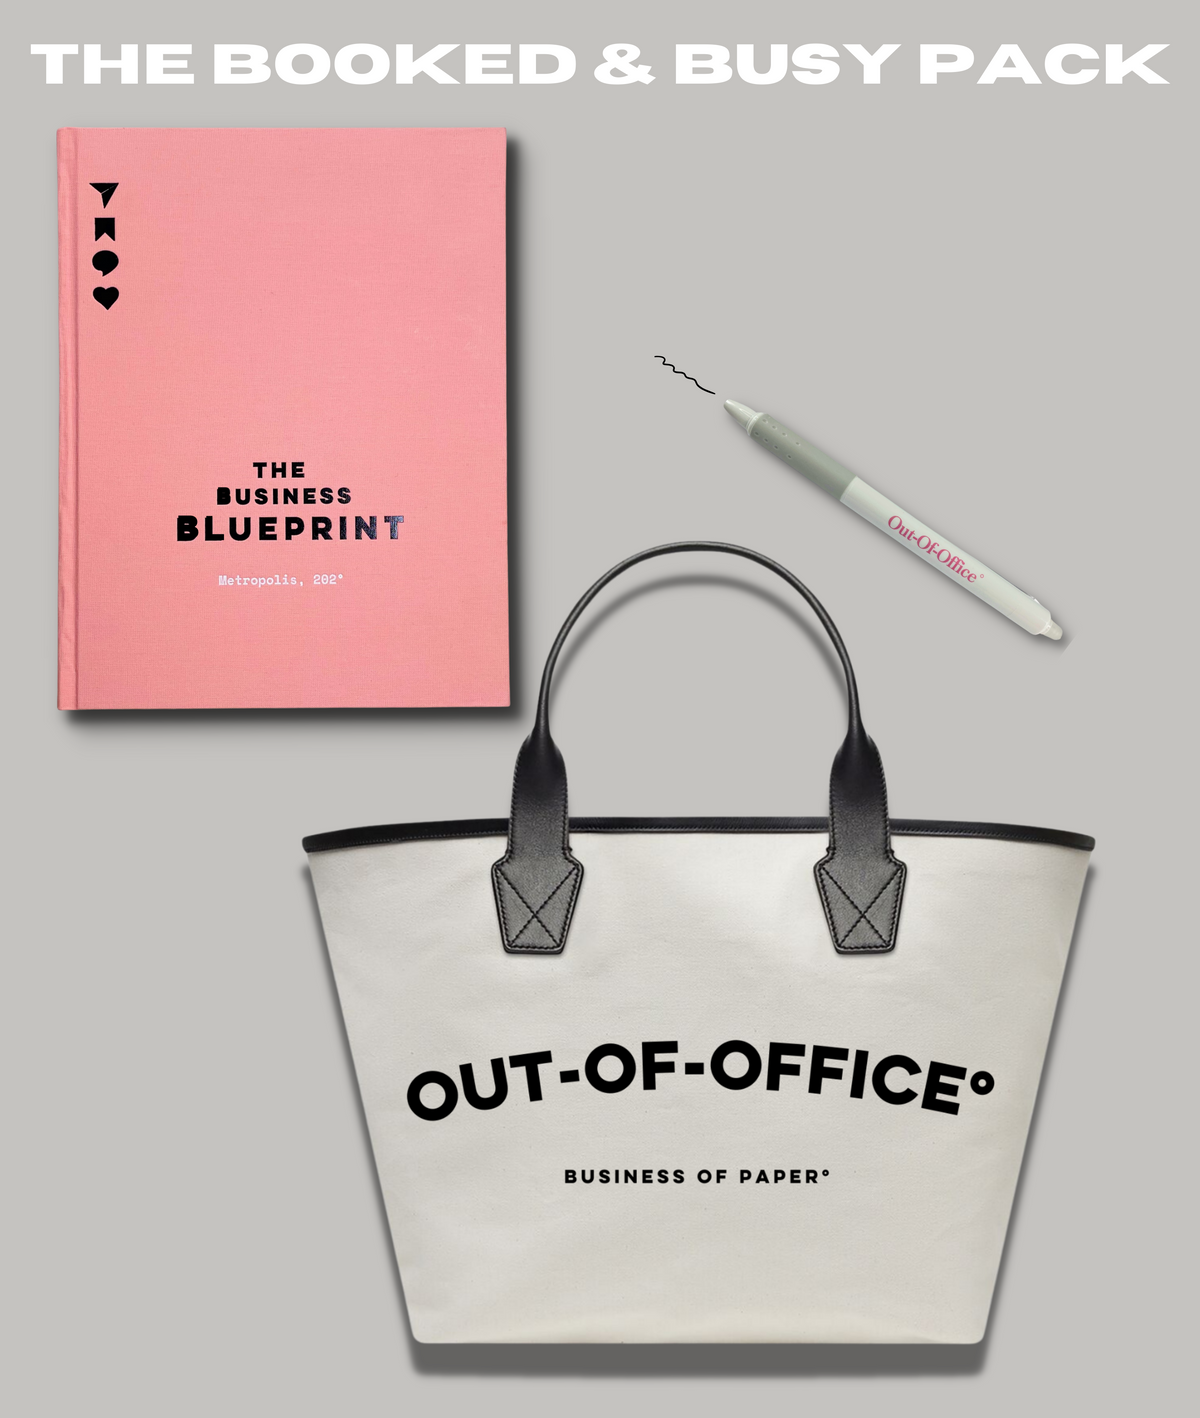 Booked & Busy Pack: E-Commerce Book, City Tote Bag, and Eraser Pen